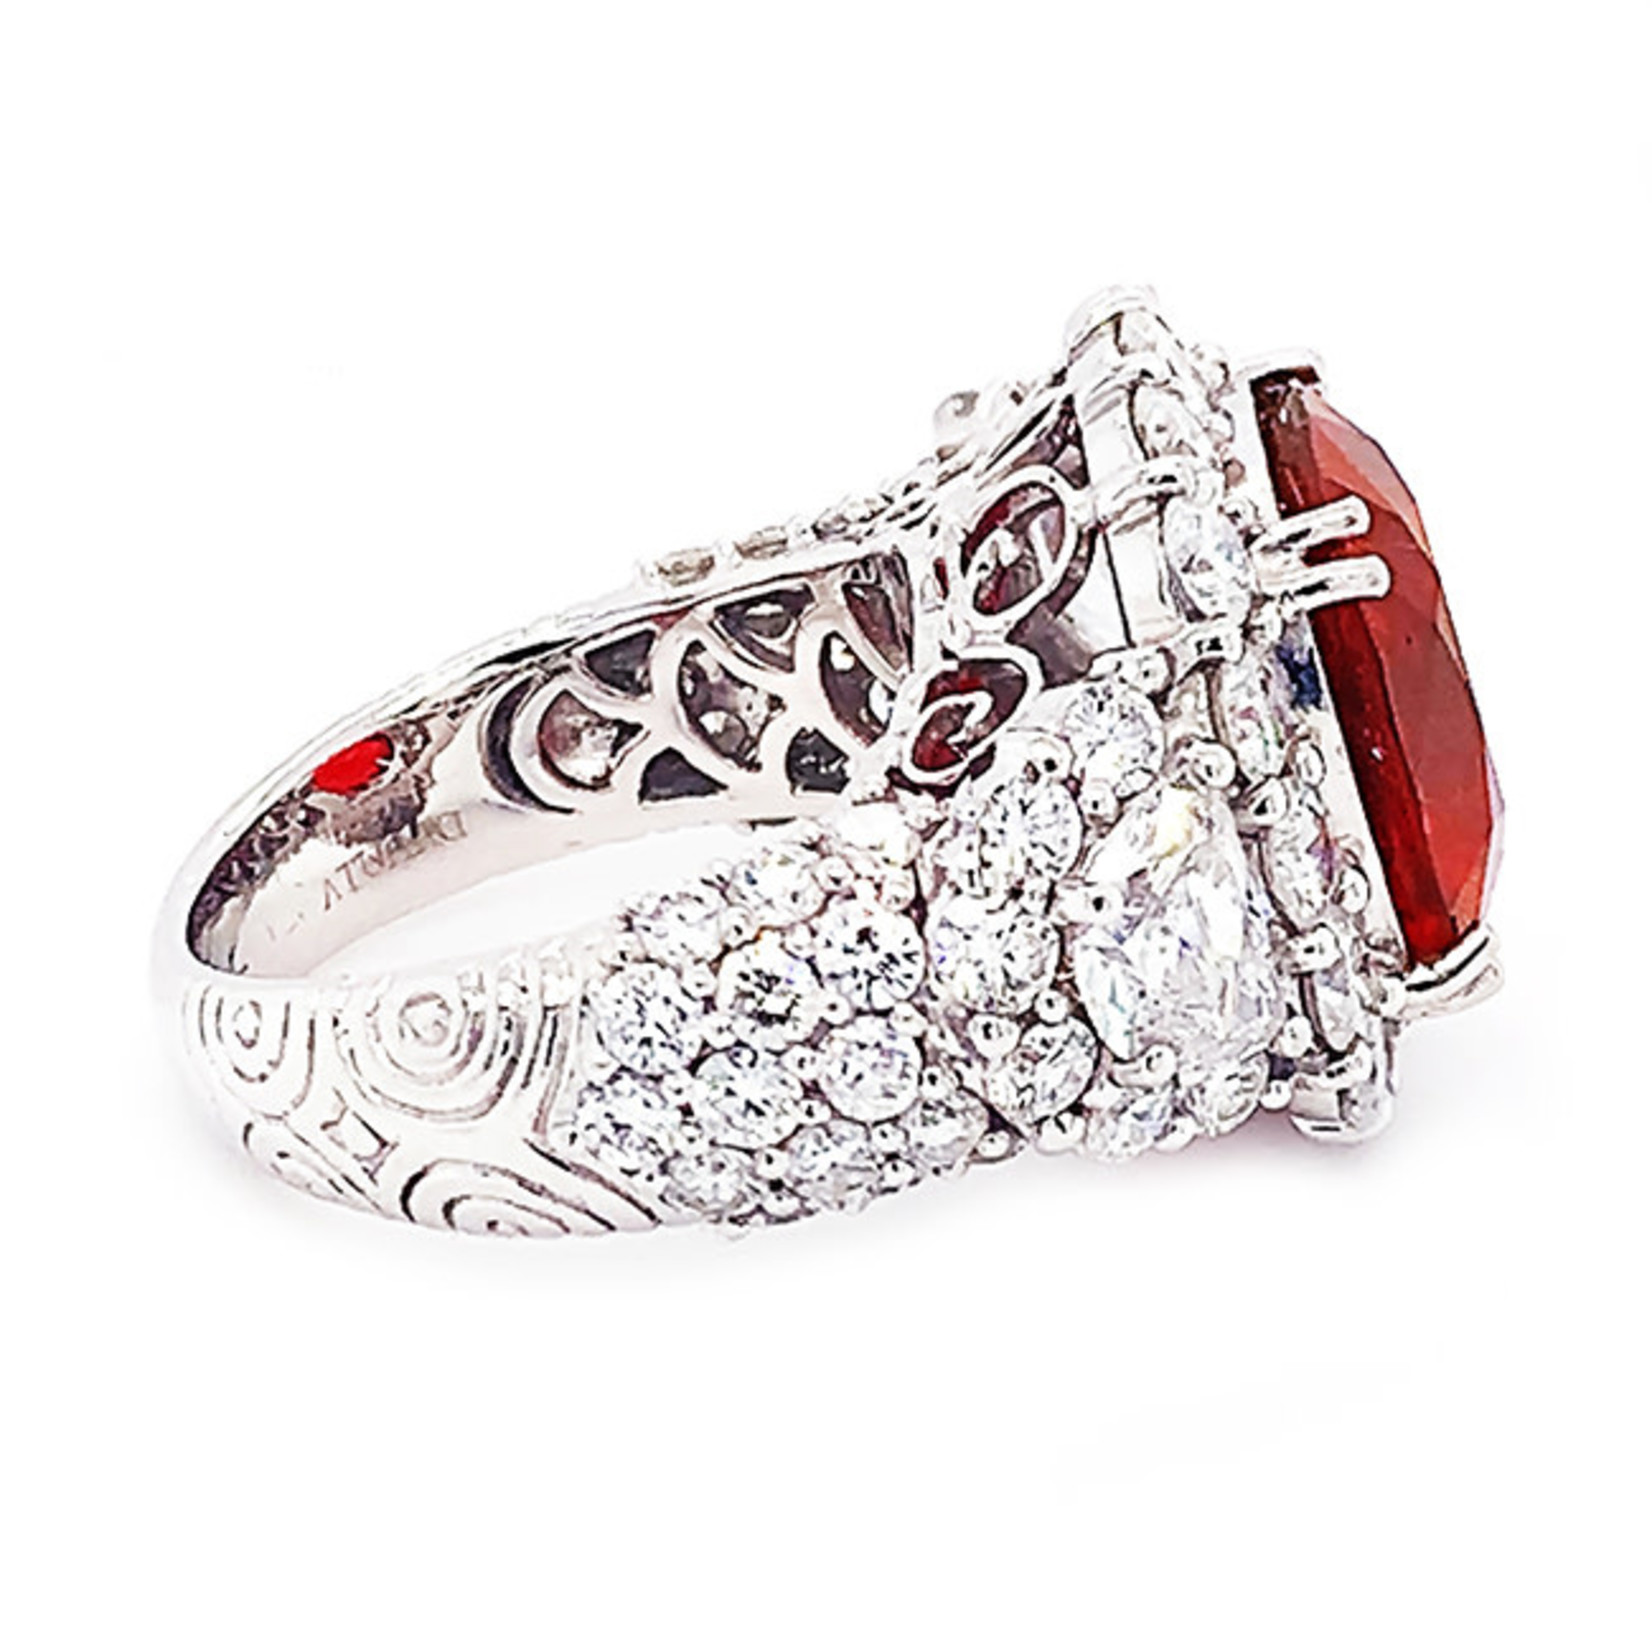 Jewelry By Danuta - Platinum Drawer Red Spinel & Diamond Platinum Ring 8.5 Burmese Spinel ring  inquire for price